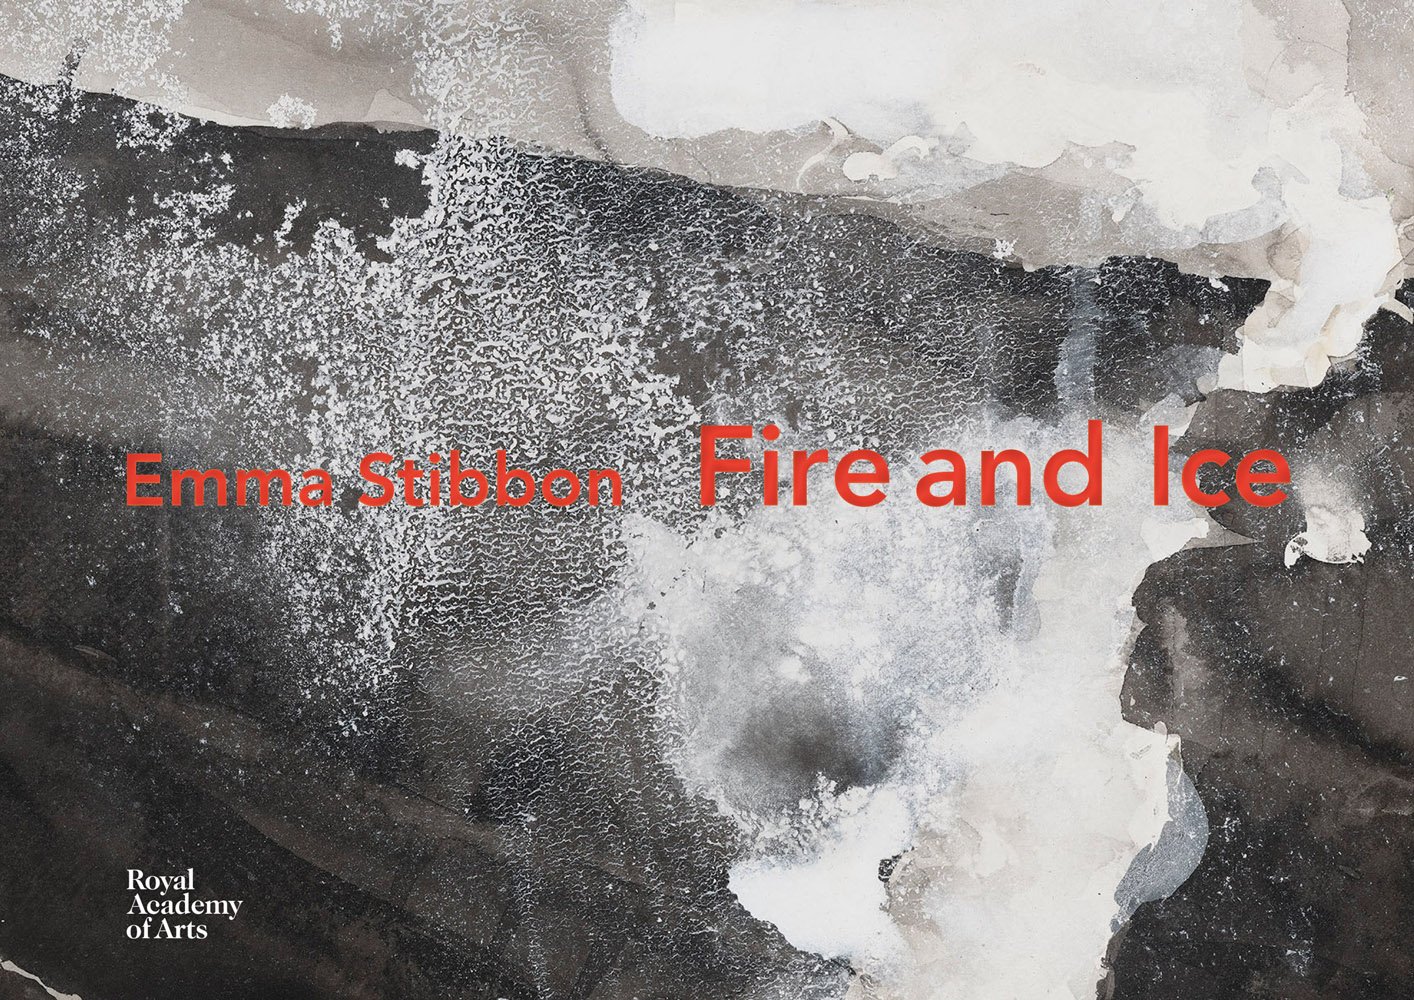 Black and white landscape painting, Emma Stibbon Fire and Ice in red font to centre by Royal Academy of Arts